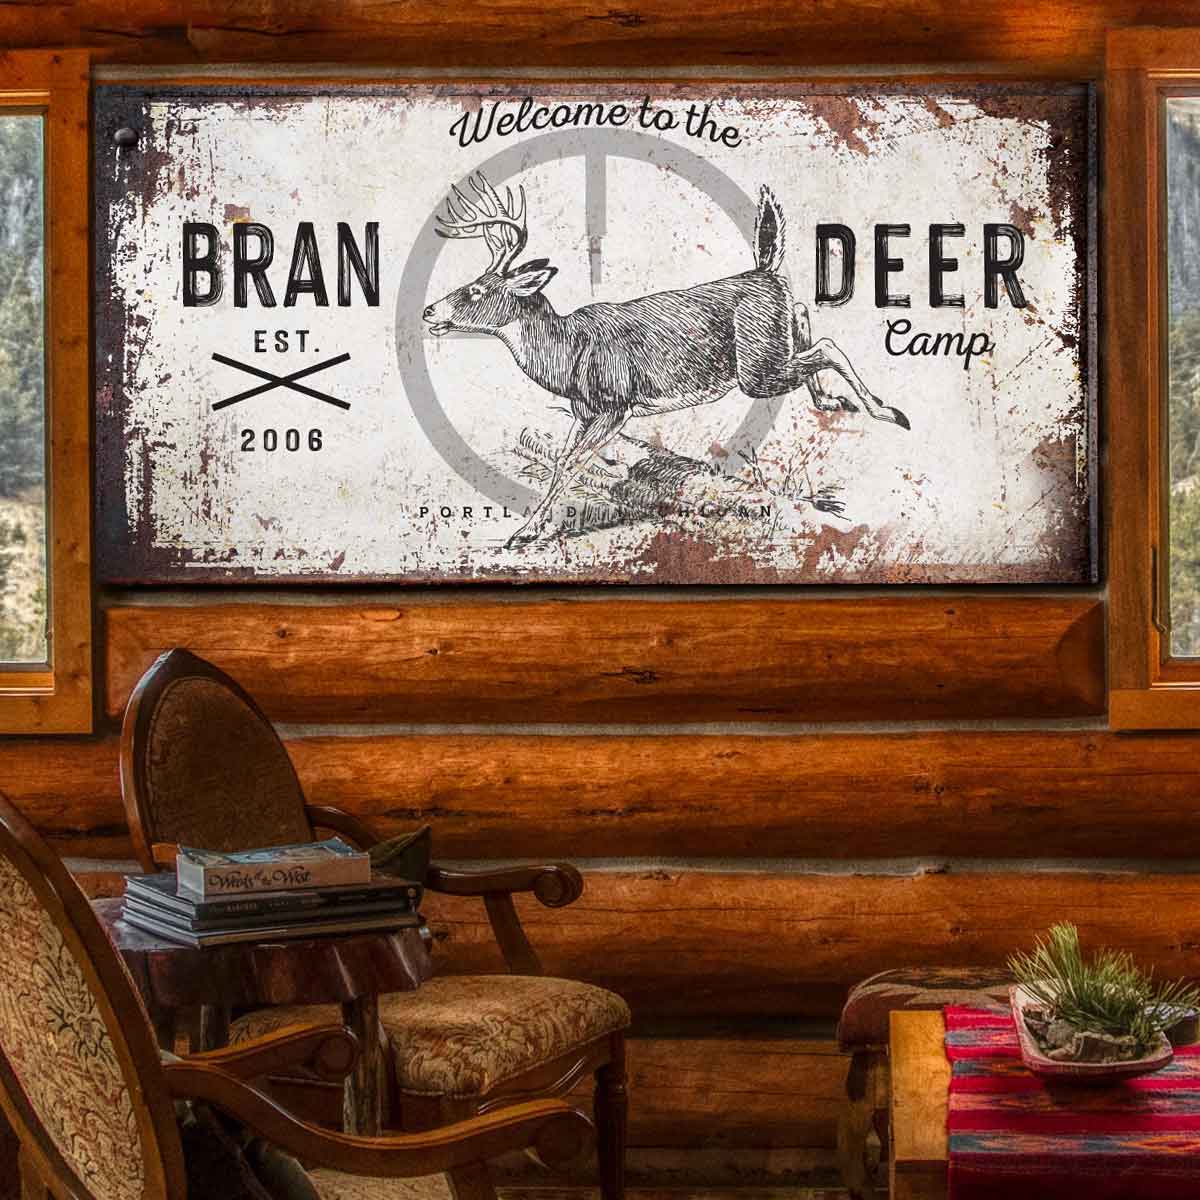 Deer Camp Signs with Family Name - Deer Hunting Cabin Decor